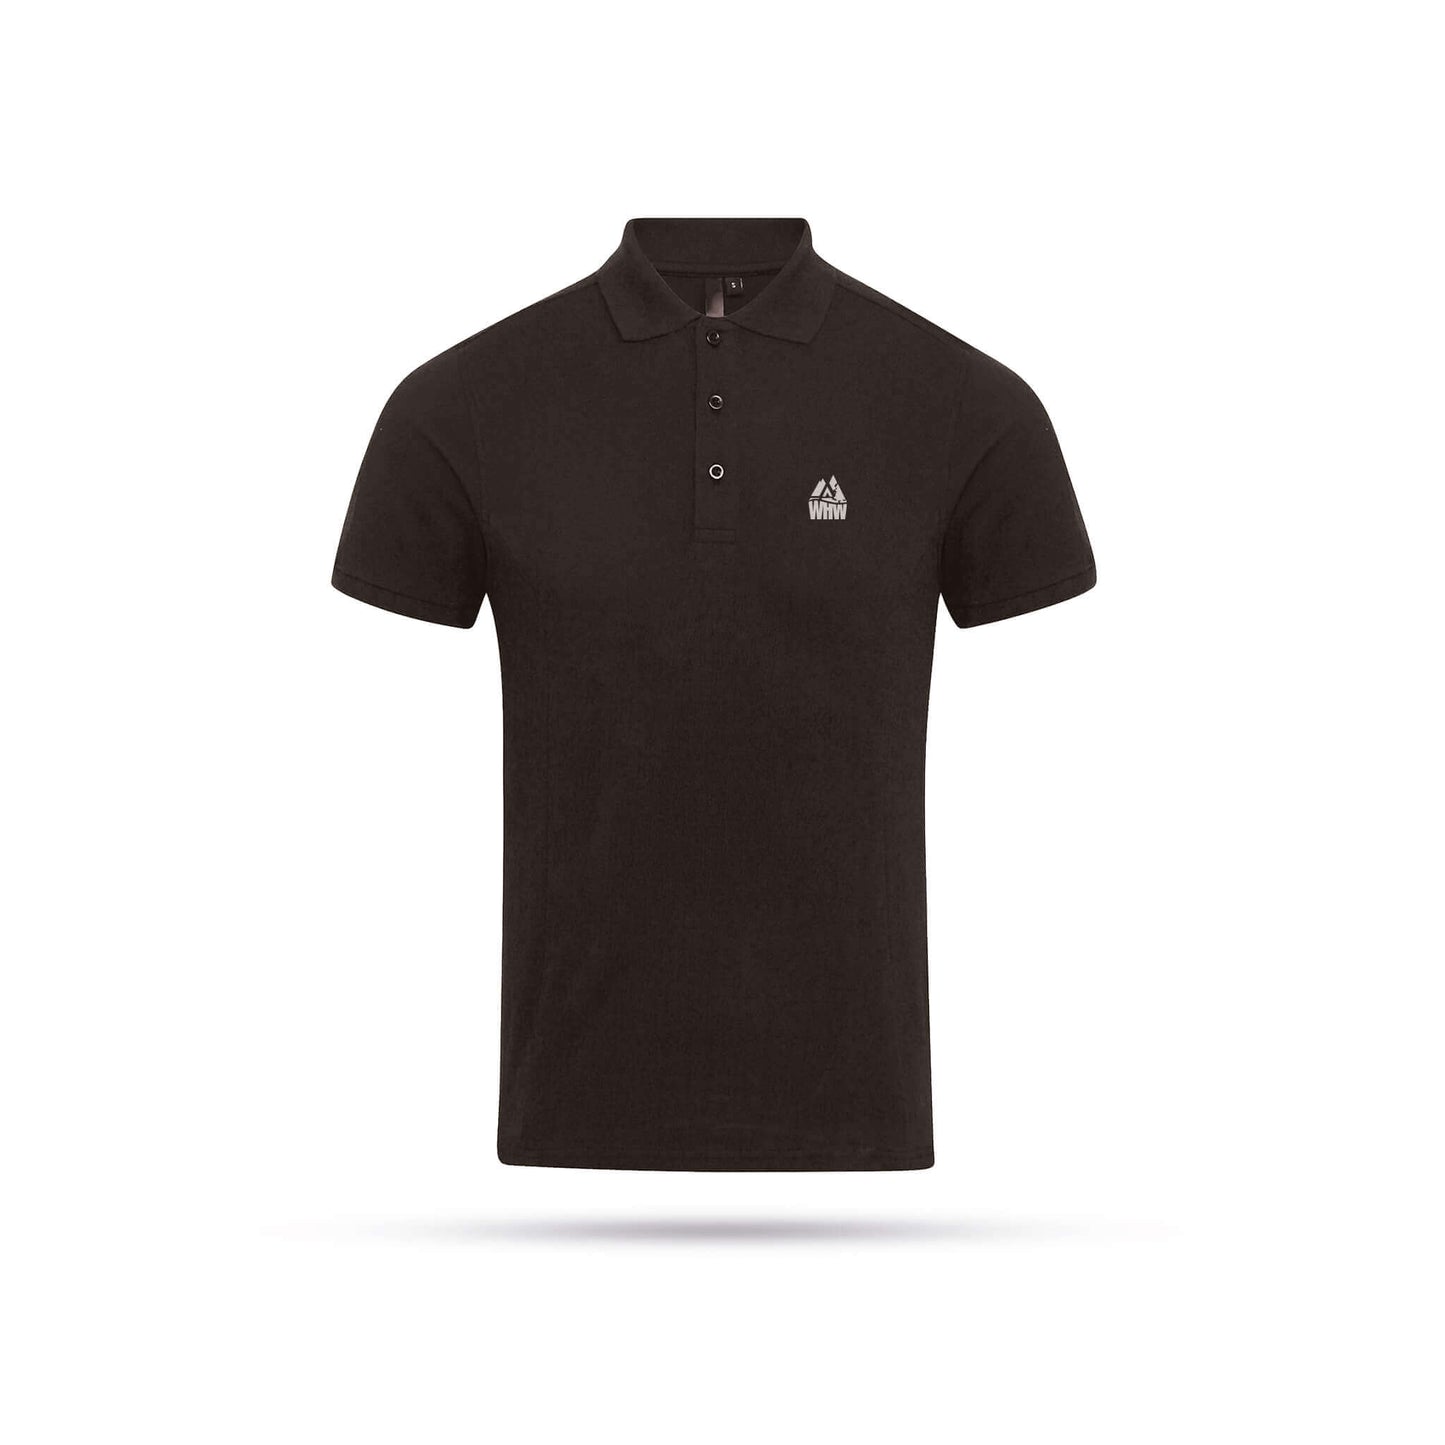 Black West Highland Way performance polo shirt with logo on left chest